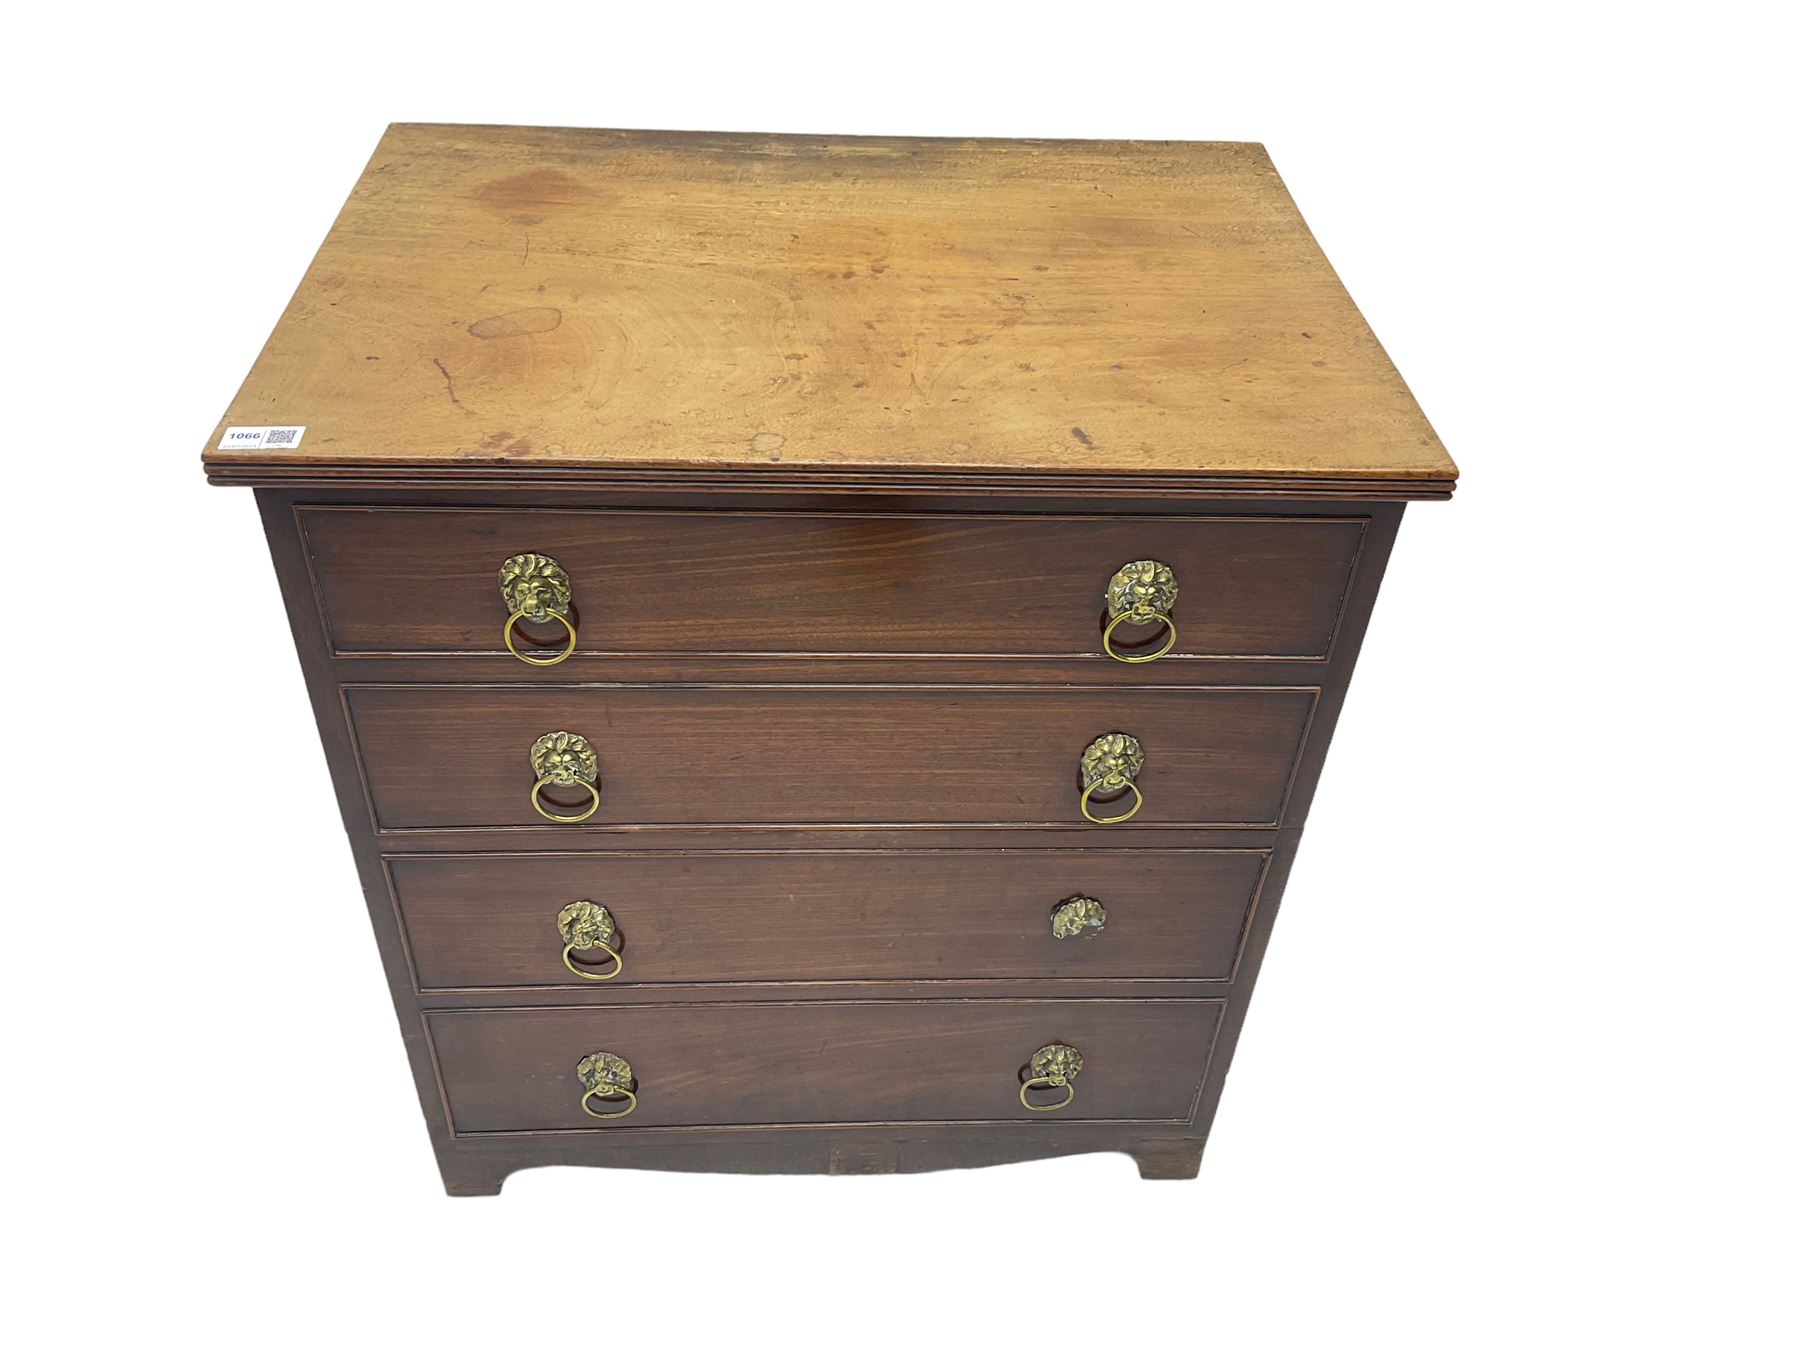 Early 19th century mahogany commode chest - Image 2 of 7